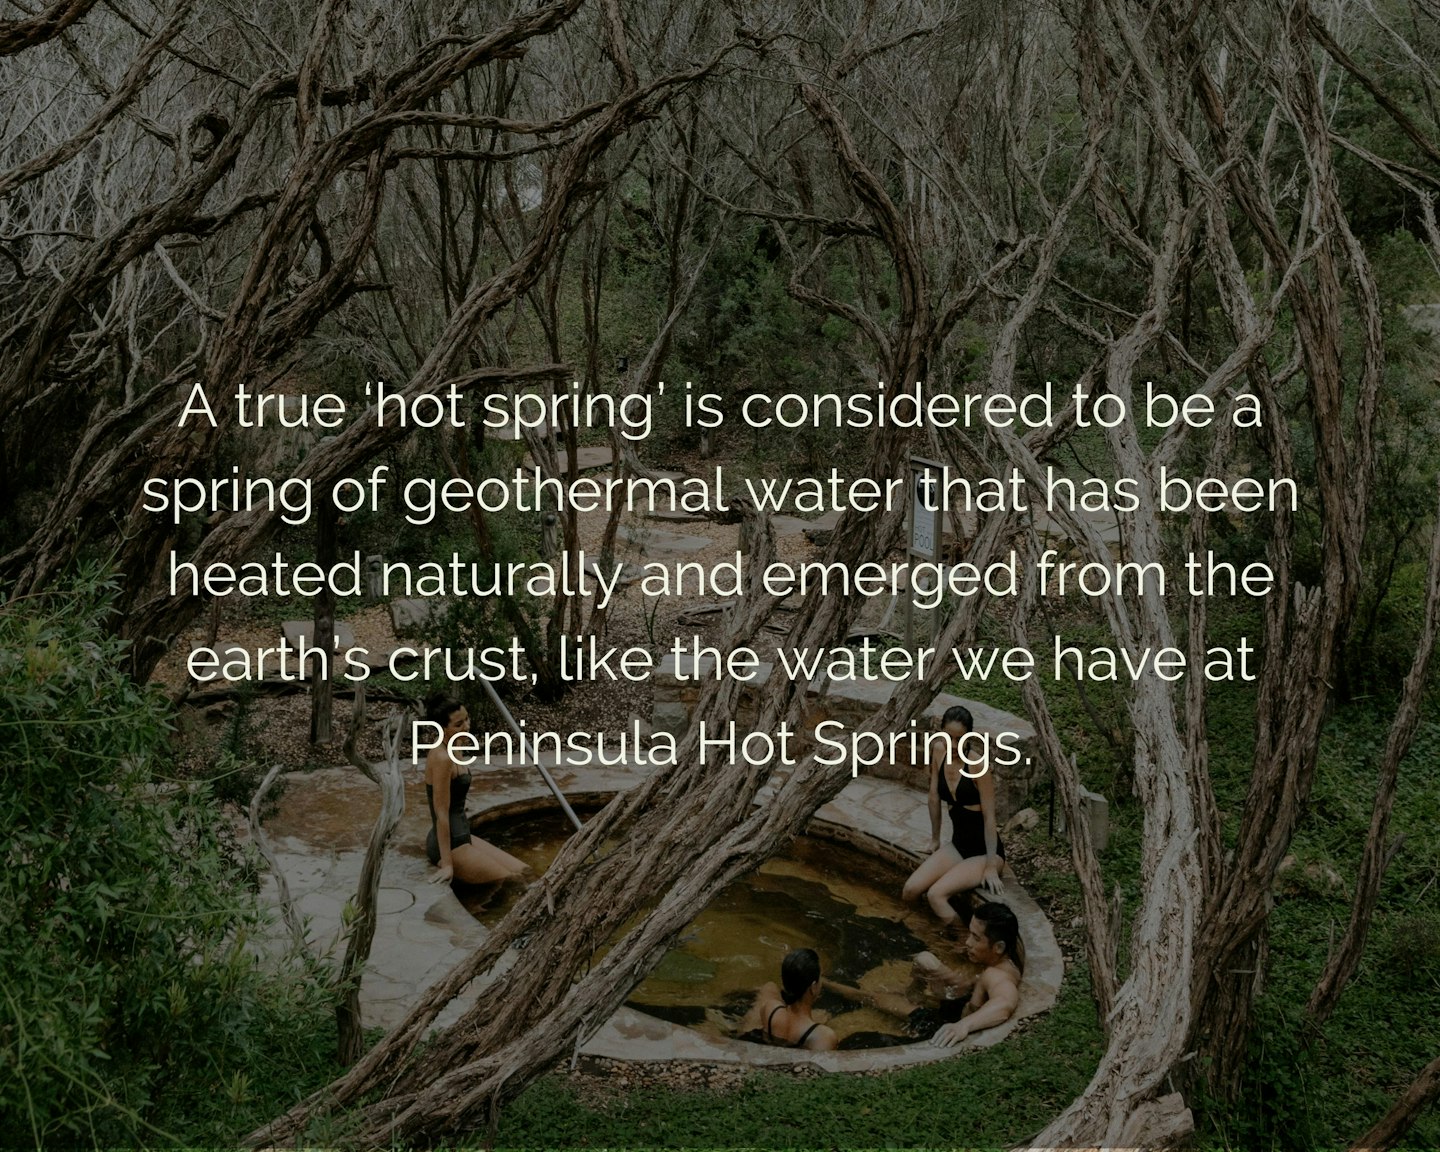 Text "A true ‘Hot Spring’ is considered to be a spring of geothermal water that has been heated naturally and emerged from the earth’s crust, like the water we have at Peninsula Hot Springs" overlaying an image of four friends in a geothermal spa